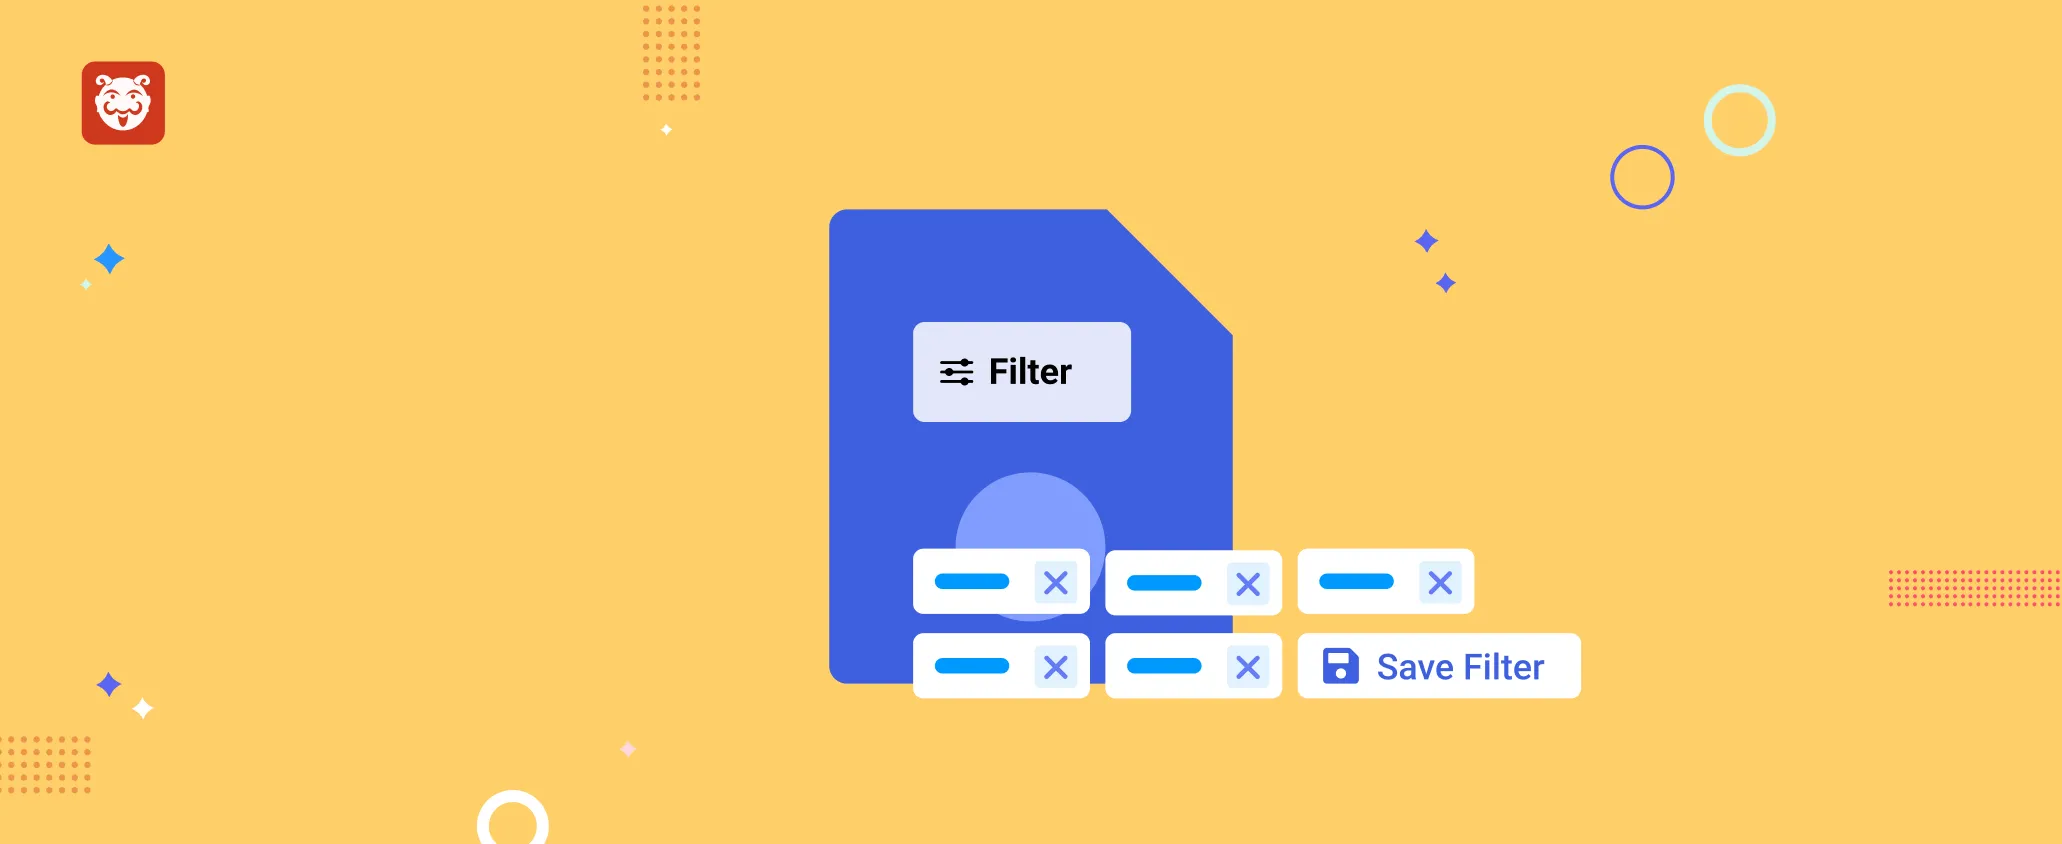 Save Filters